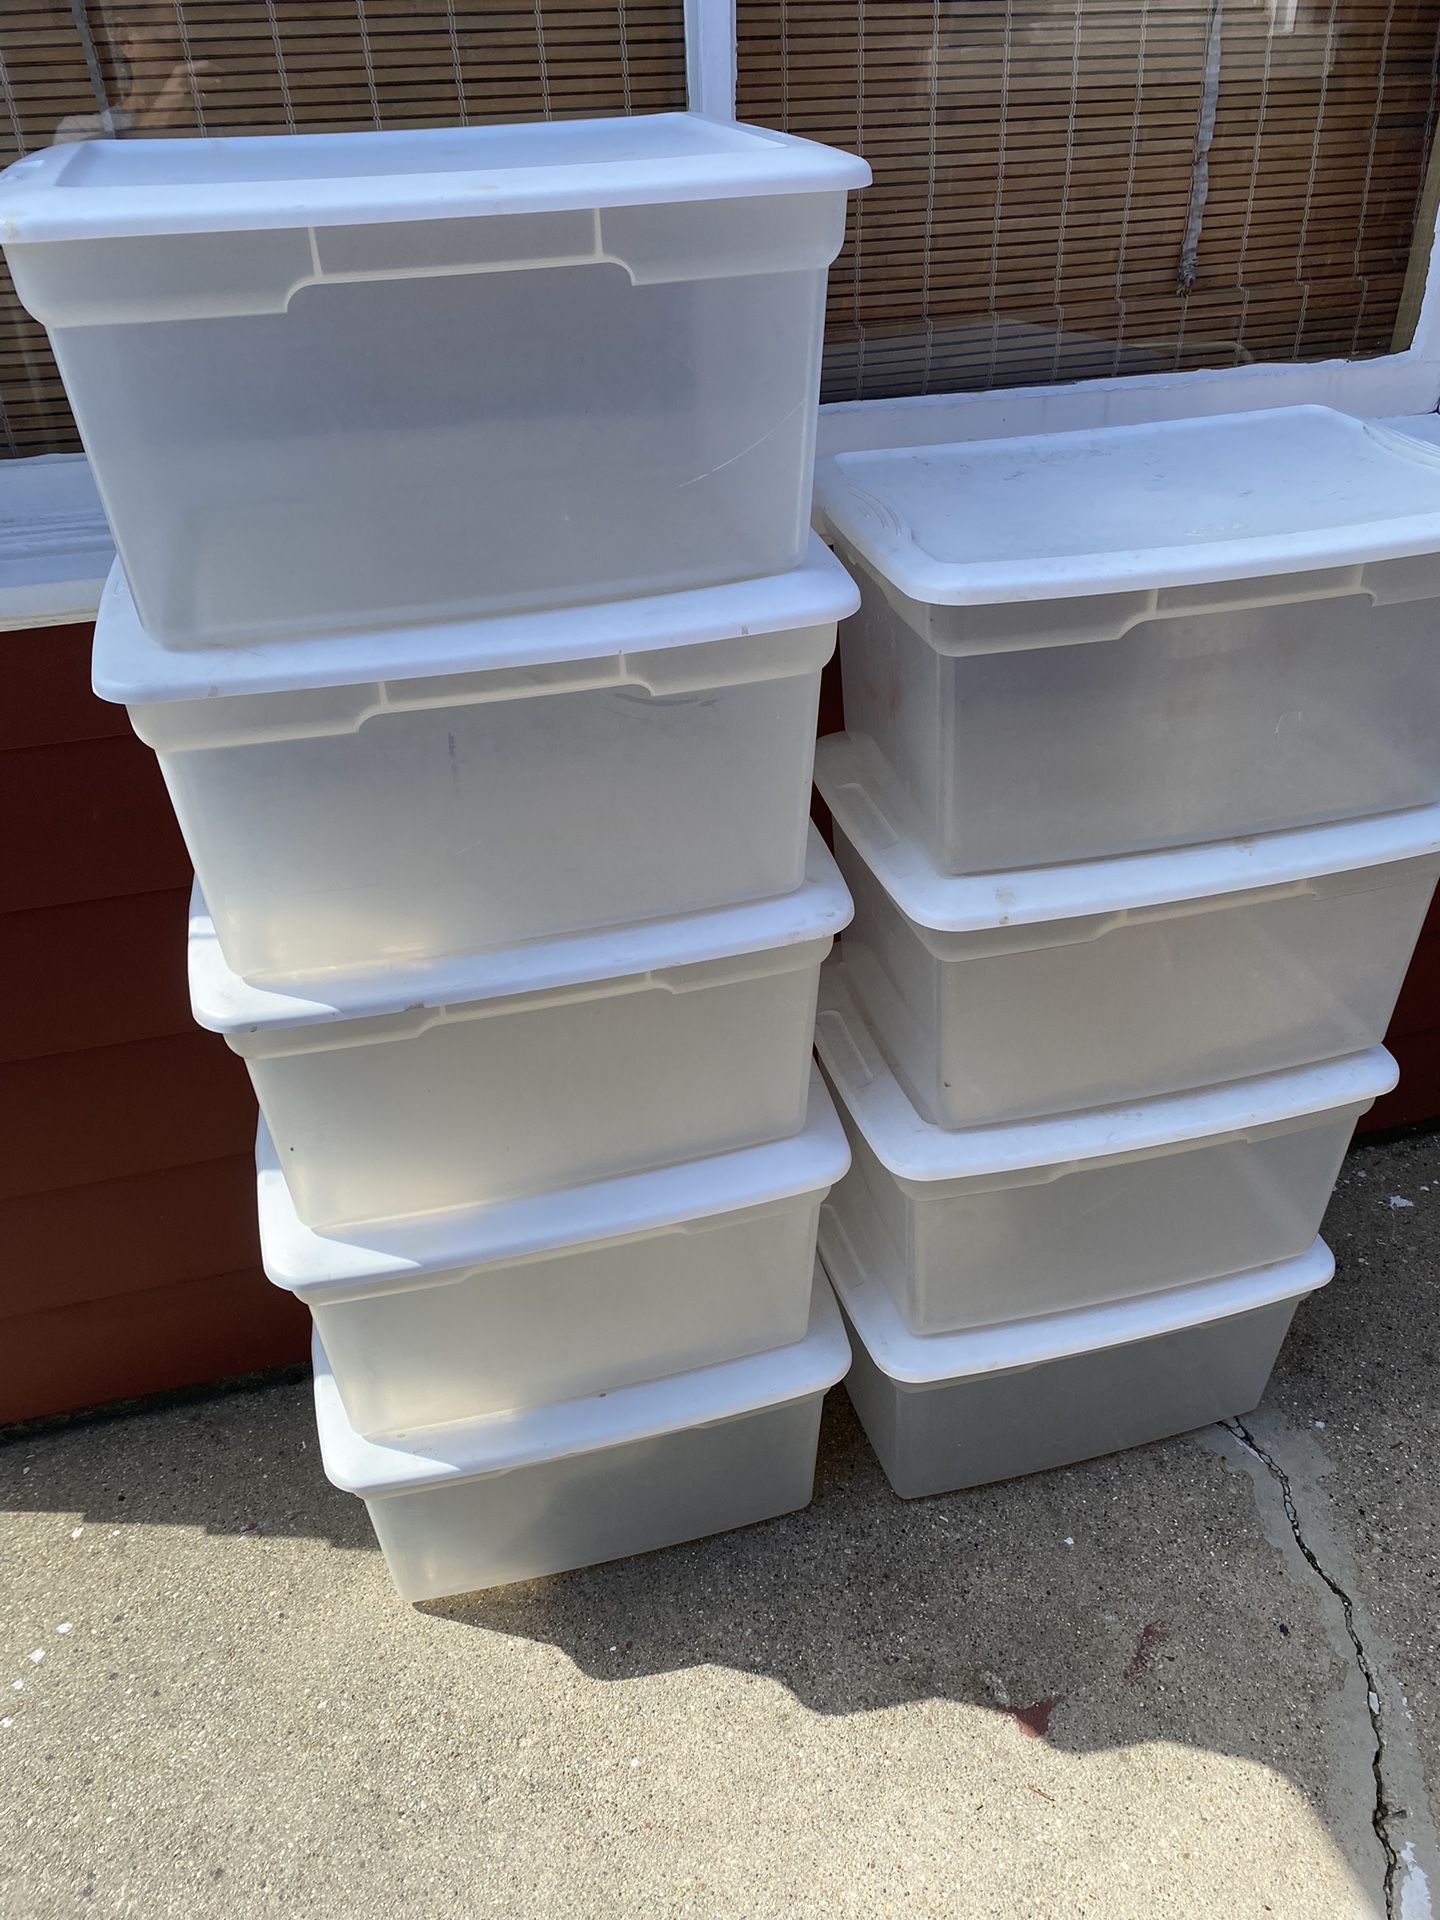 5 Clear Plastic Sterilite Containers Totes 4 Have Sold as Pictured